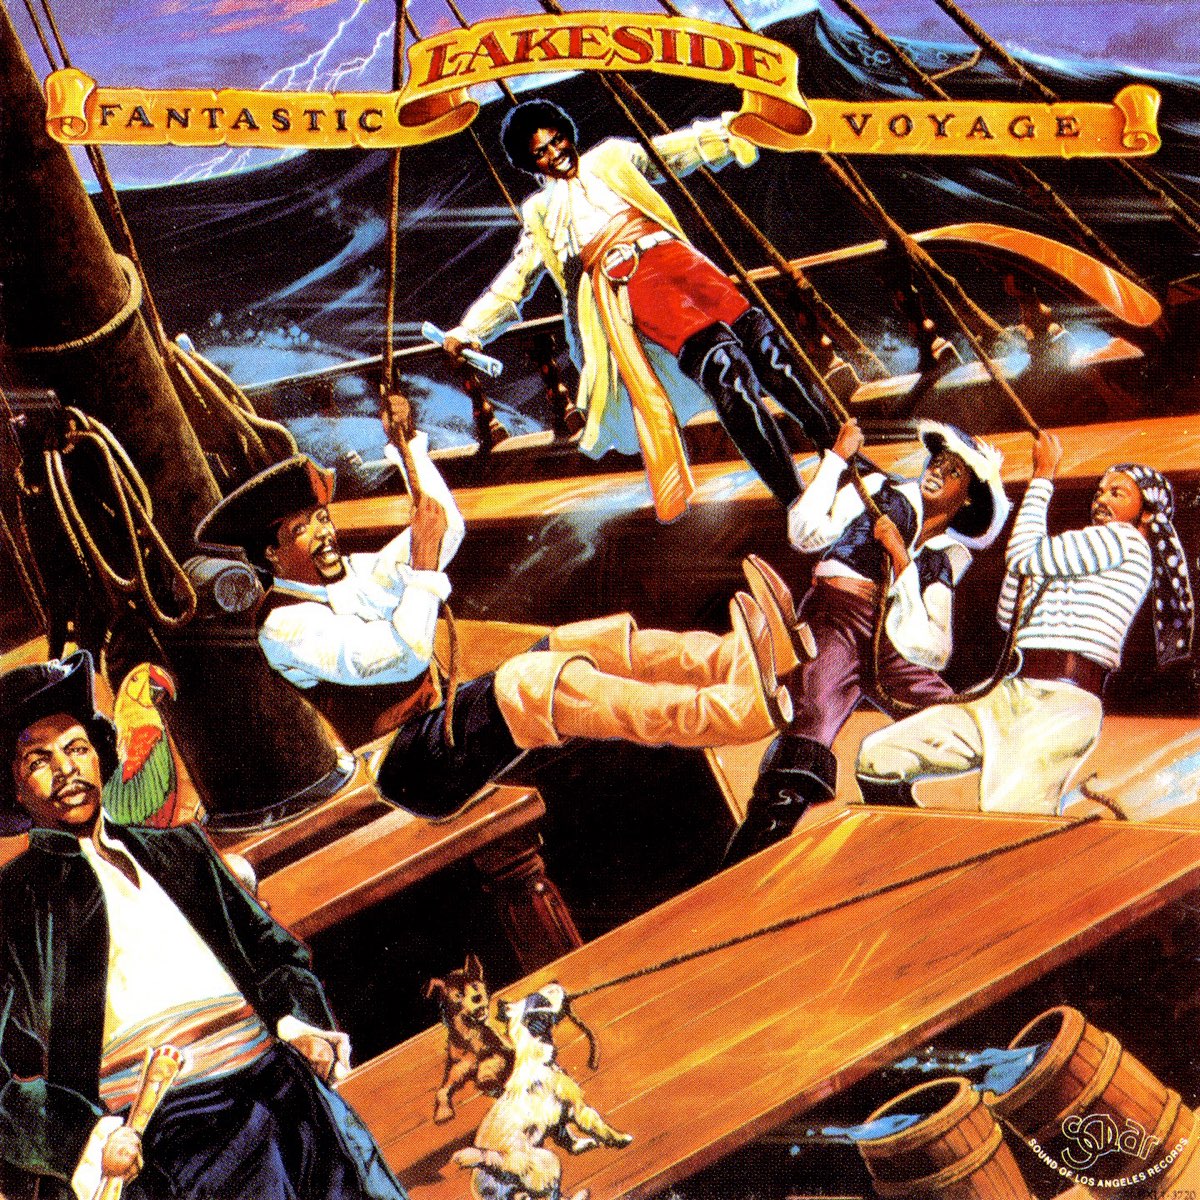 fantastic voyage song by lakeside